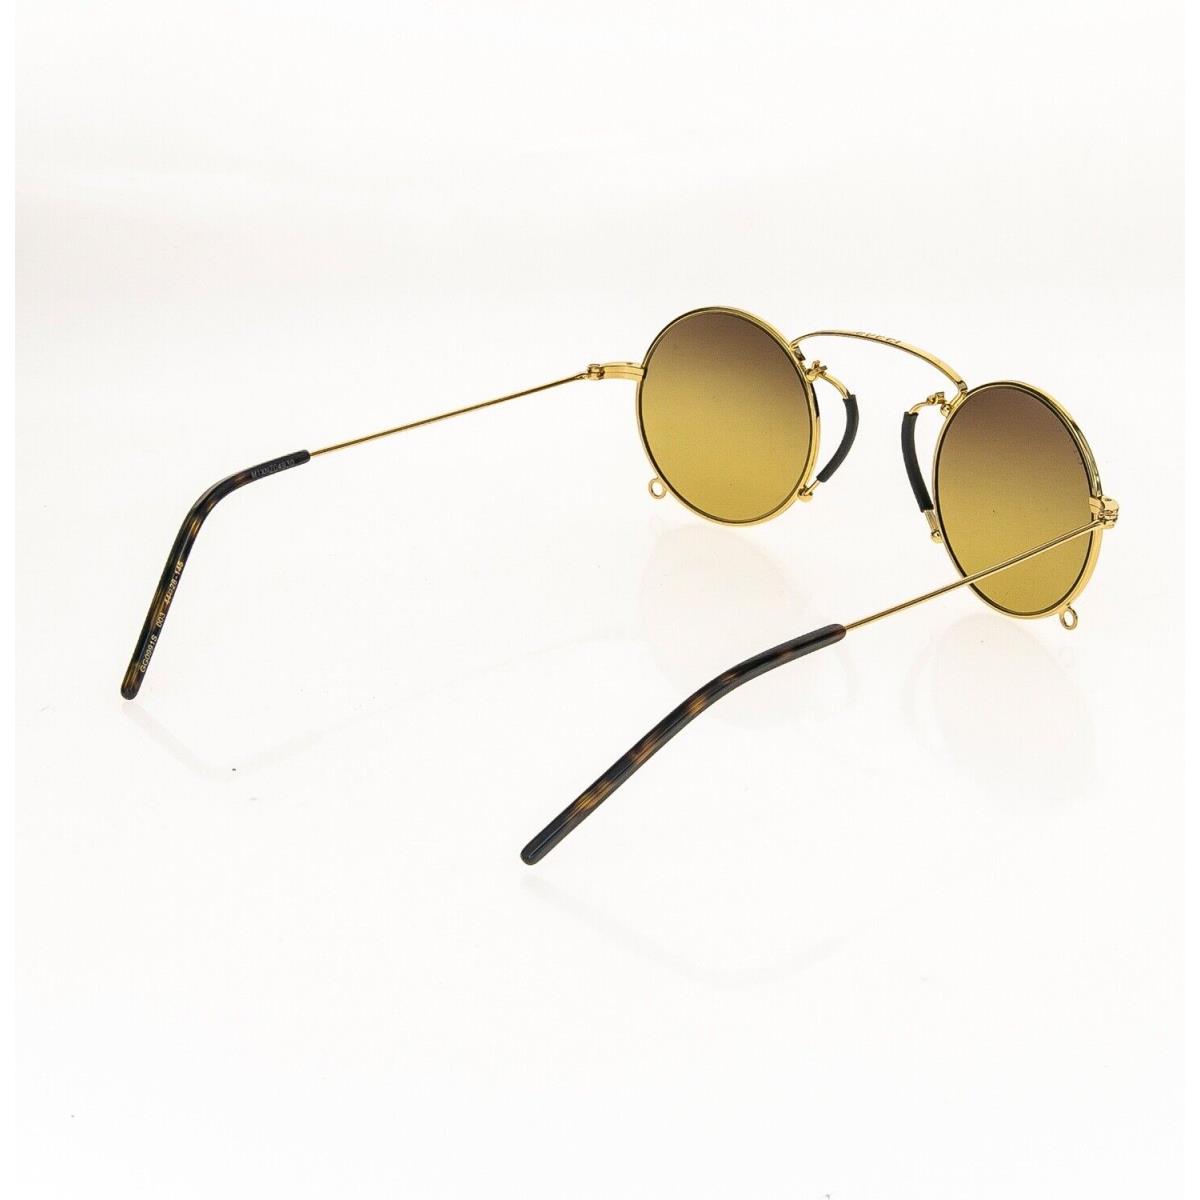 Gucci sunglasses  - 003 , Gold Frame, Brown Lens 0